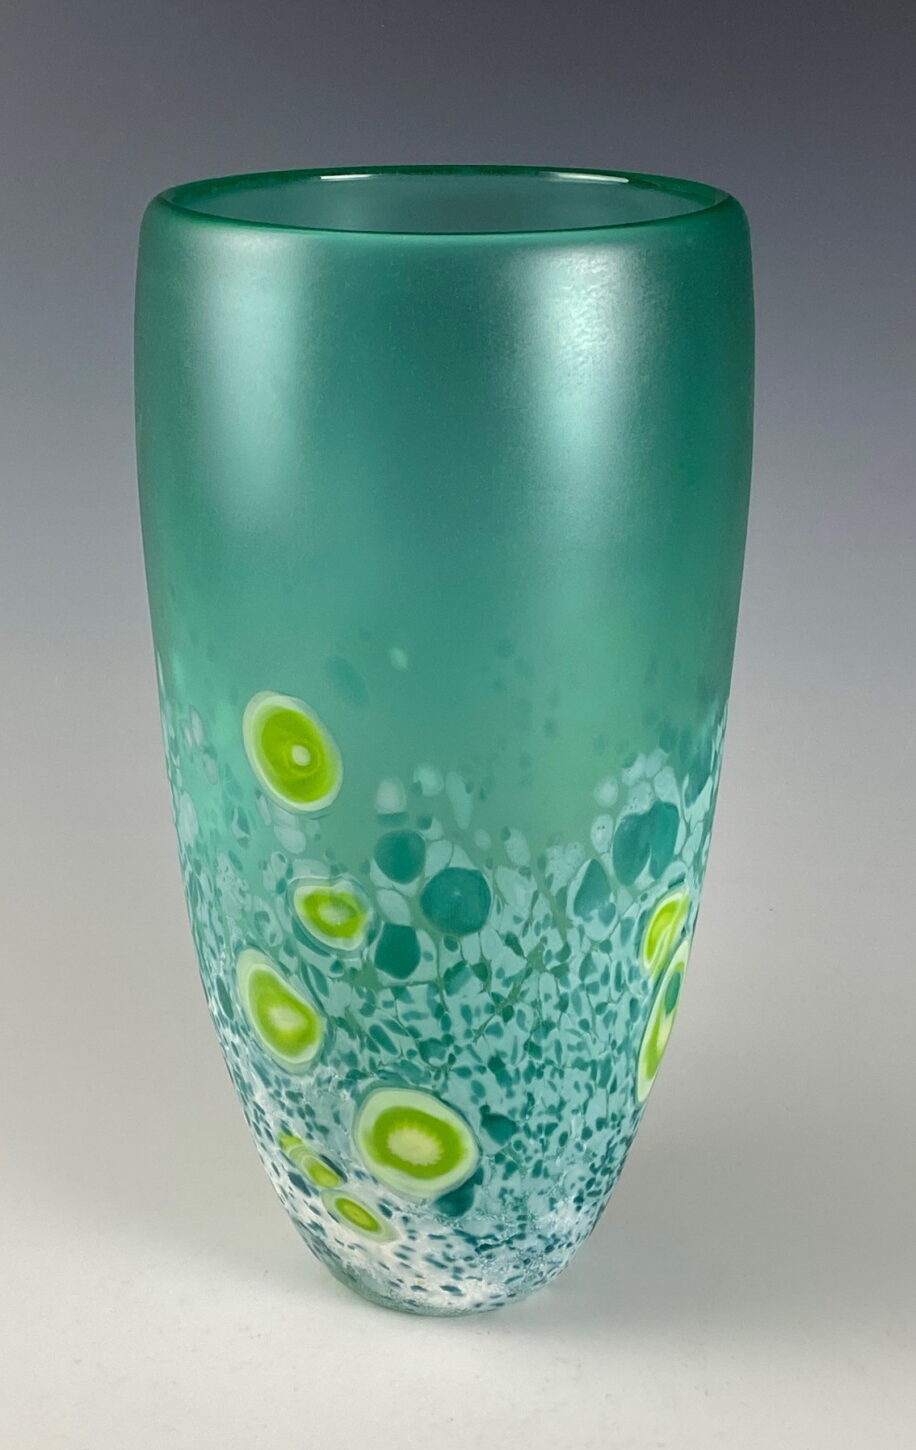 Lily Vase - Frosted (Teal Green) by Lisa Samphire at The Avenue Gallery, a contemporary fine art gallery in Victoria, BC, Canada.